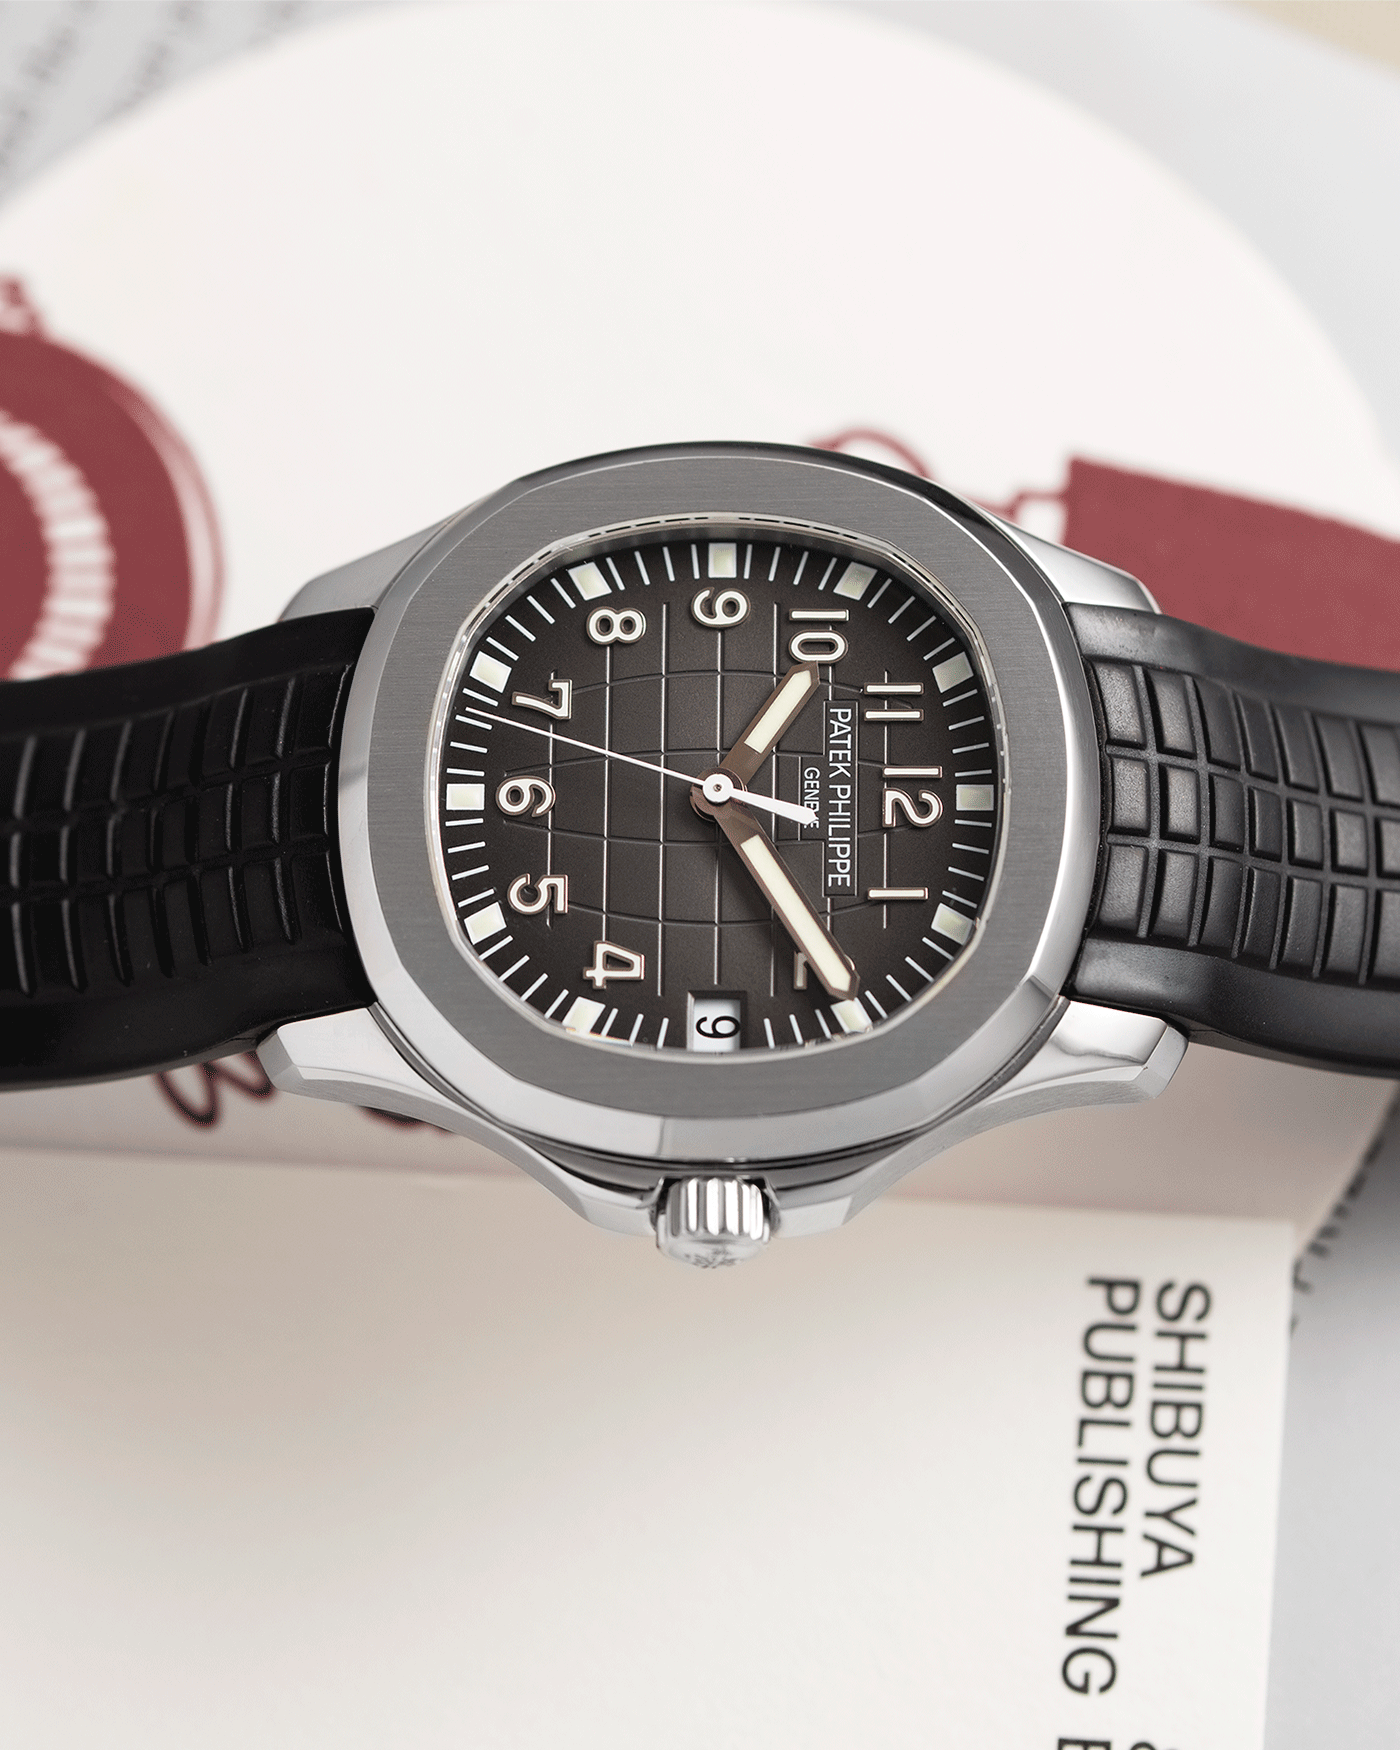 Patek Philippe Aquanaut 5165A Watch | S.Song Timepieces 